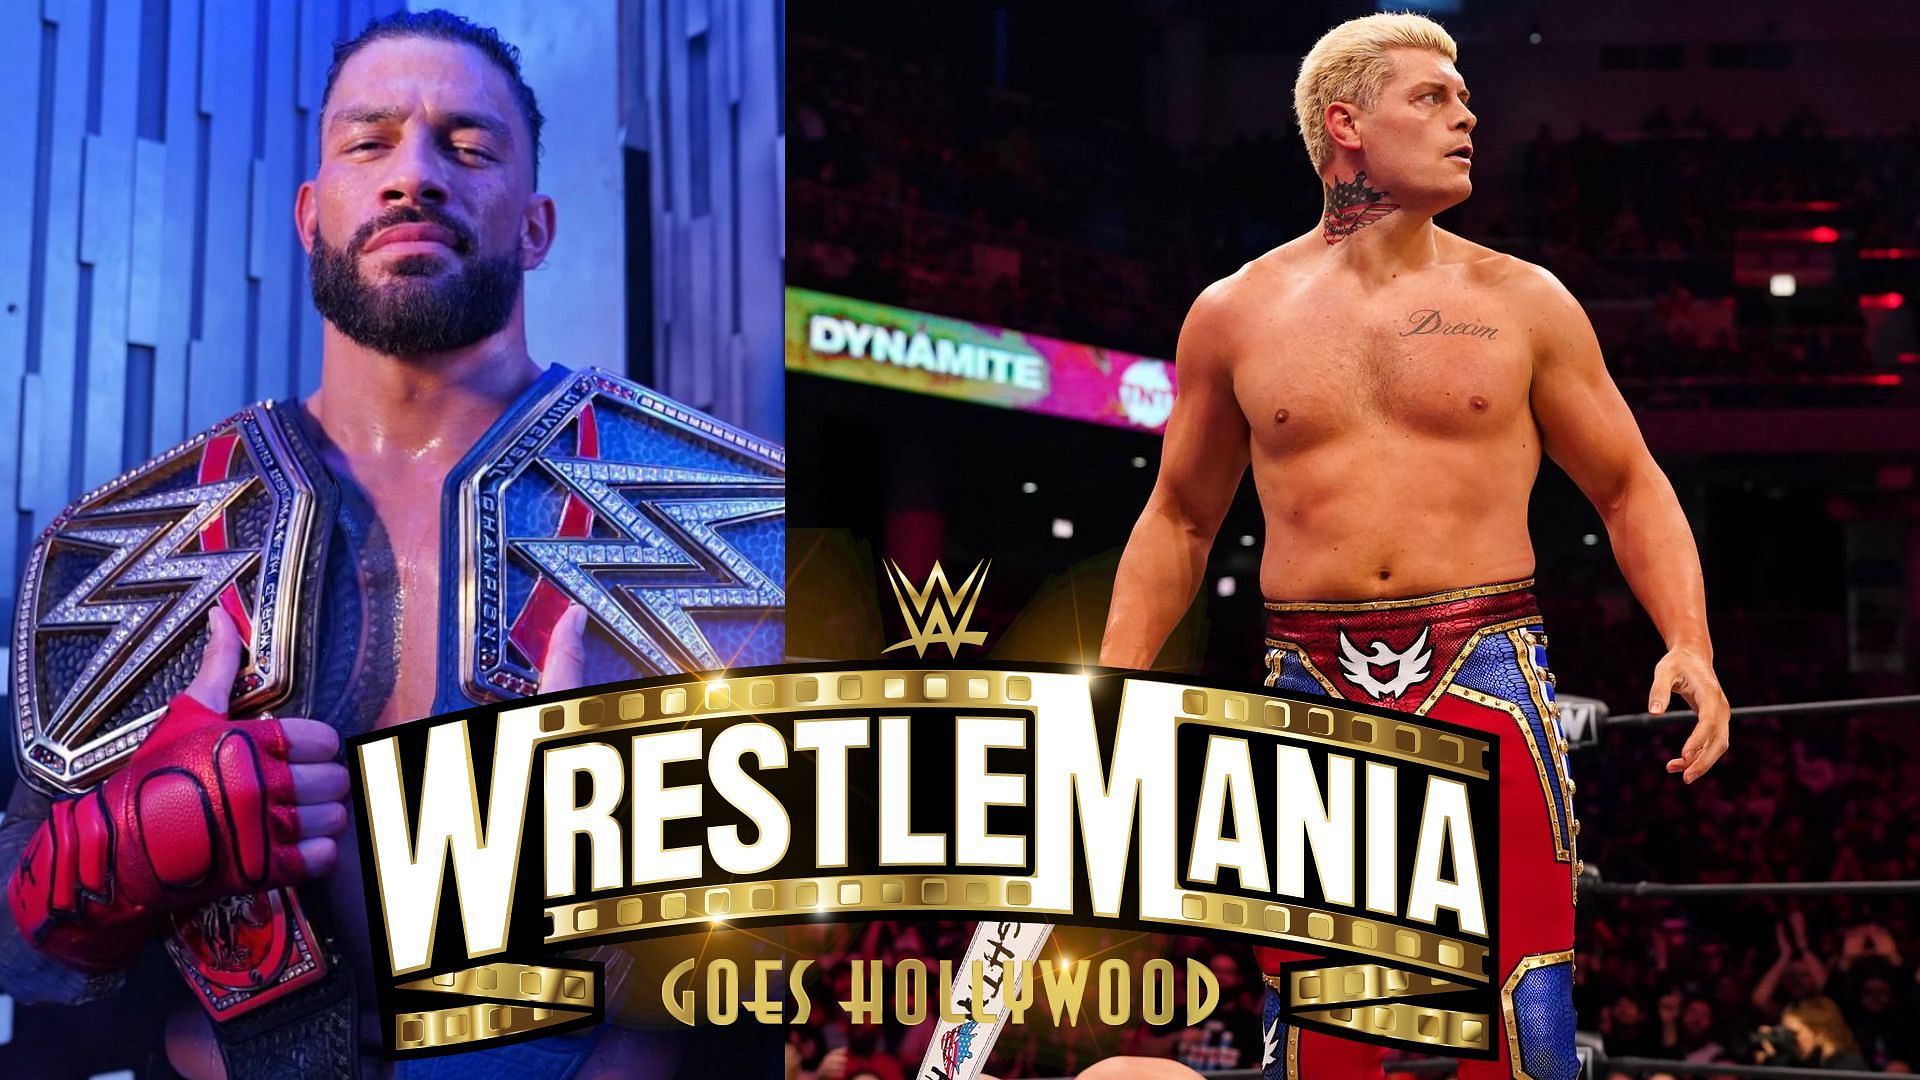 There are plenty of ideas that could make for a fantastic WrestleMania 39 main event. One of those matches could feature Roman Reigns &amp; Cody Rhodes.